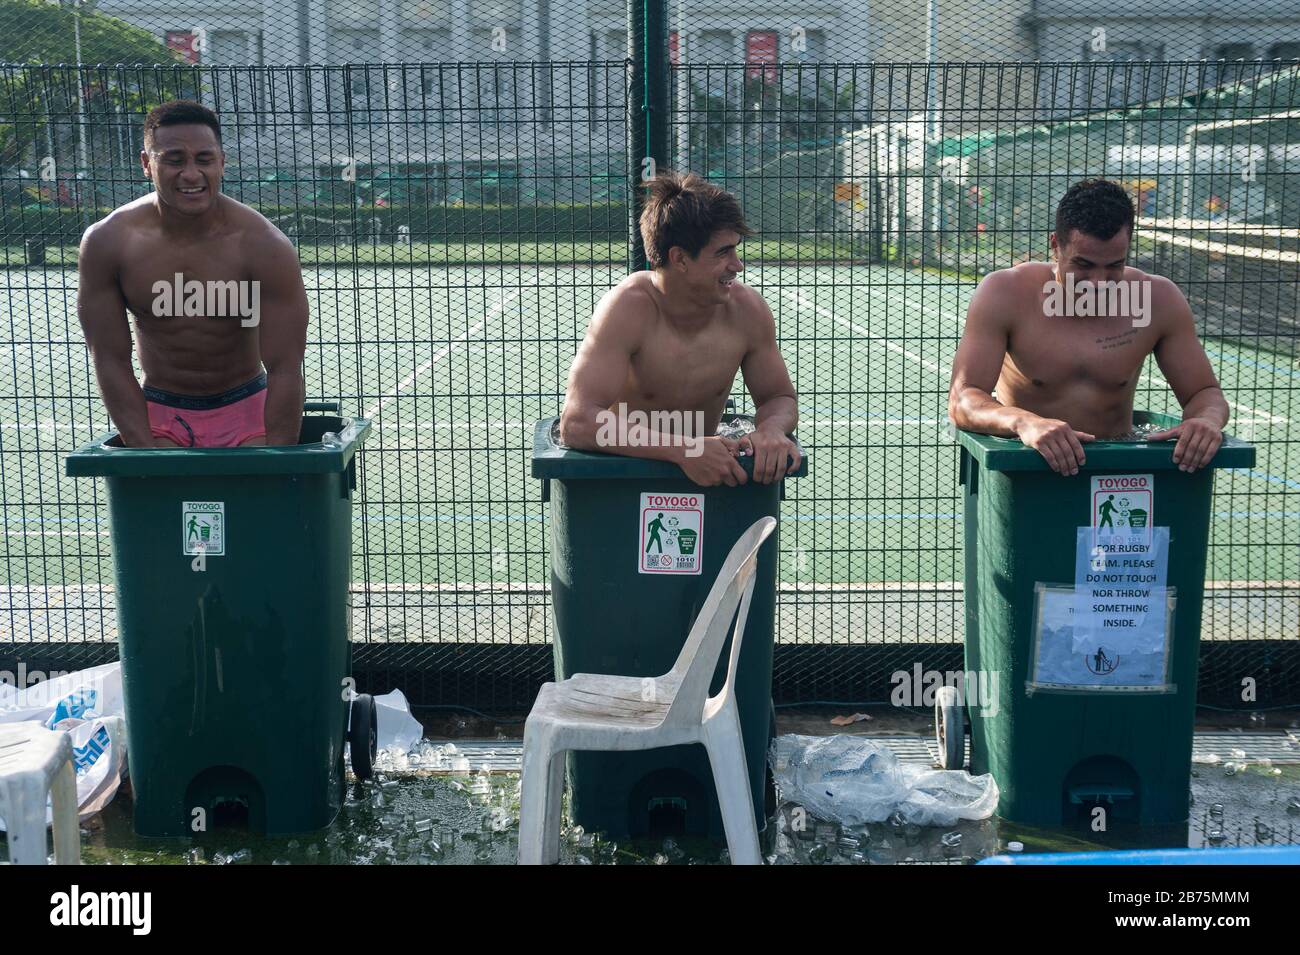 04.11.2017, Singapore, Republic of Singapore, Asia - After a game at the Rugby Sevens Tournament, three players of the Australian rugby team Casuarina Cougars cool down in garbage cans filled with ice water.     Use for editorial purposes only [automated translation] Stock Photo